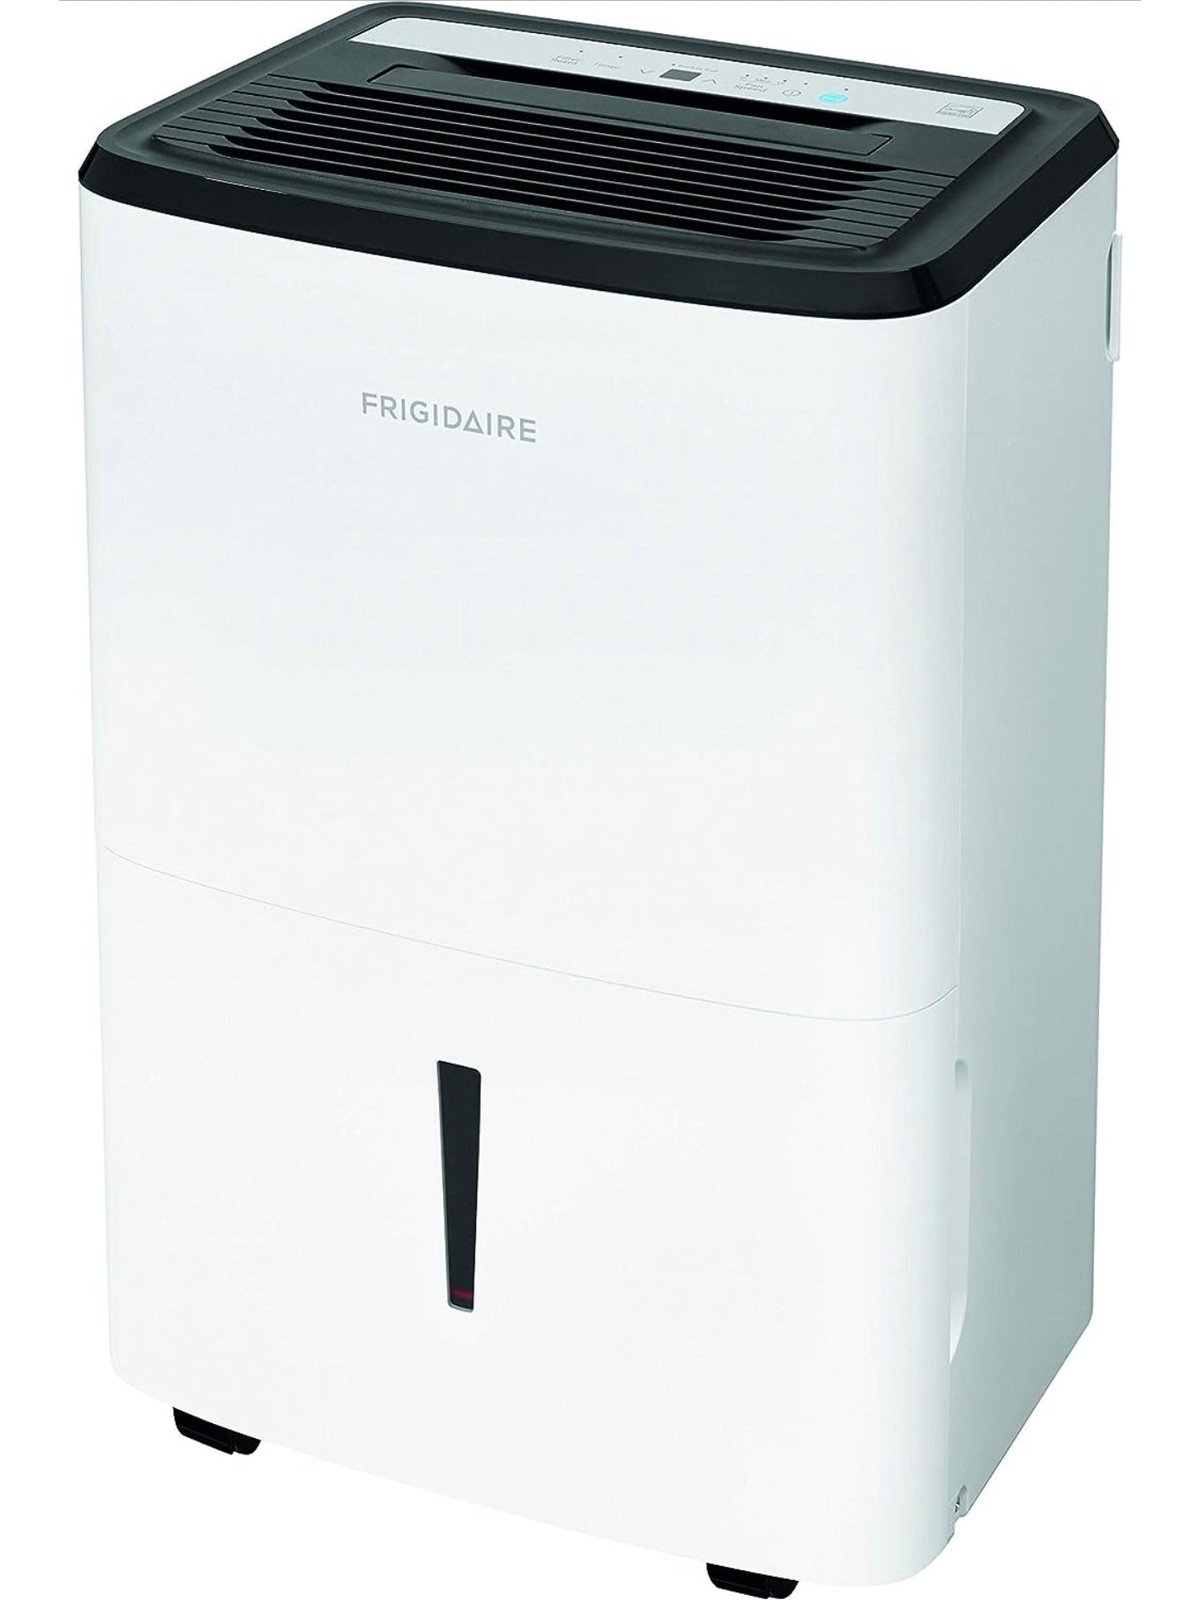 Frigidaire 50 Pint Dehumidifier with Pump. 4,500 Square Foot Coverage. Ideal for Large Rooms and Basements. 1.7 Gallon Bucket Capacity